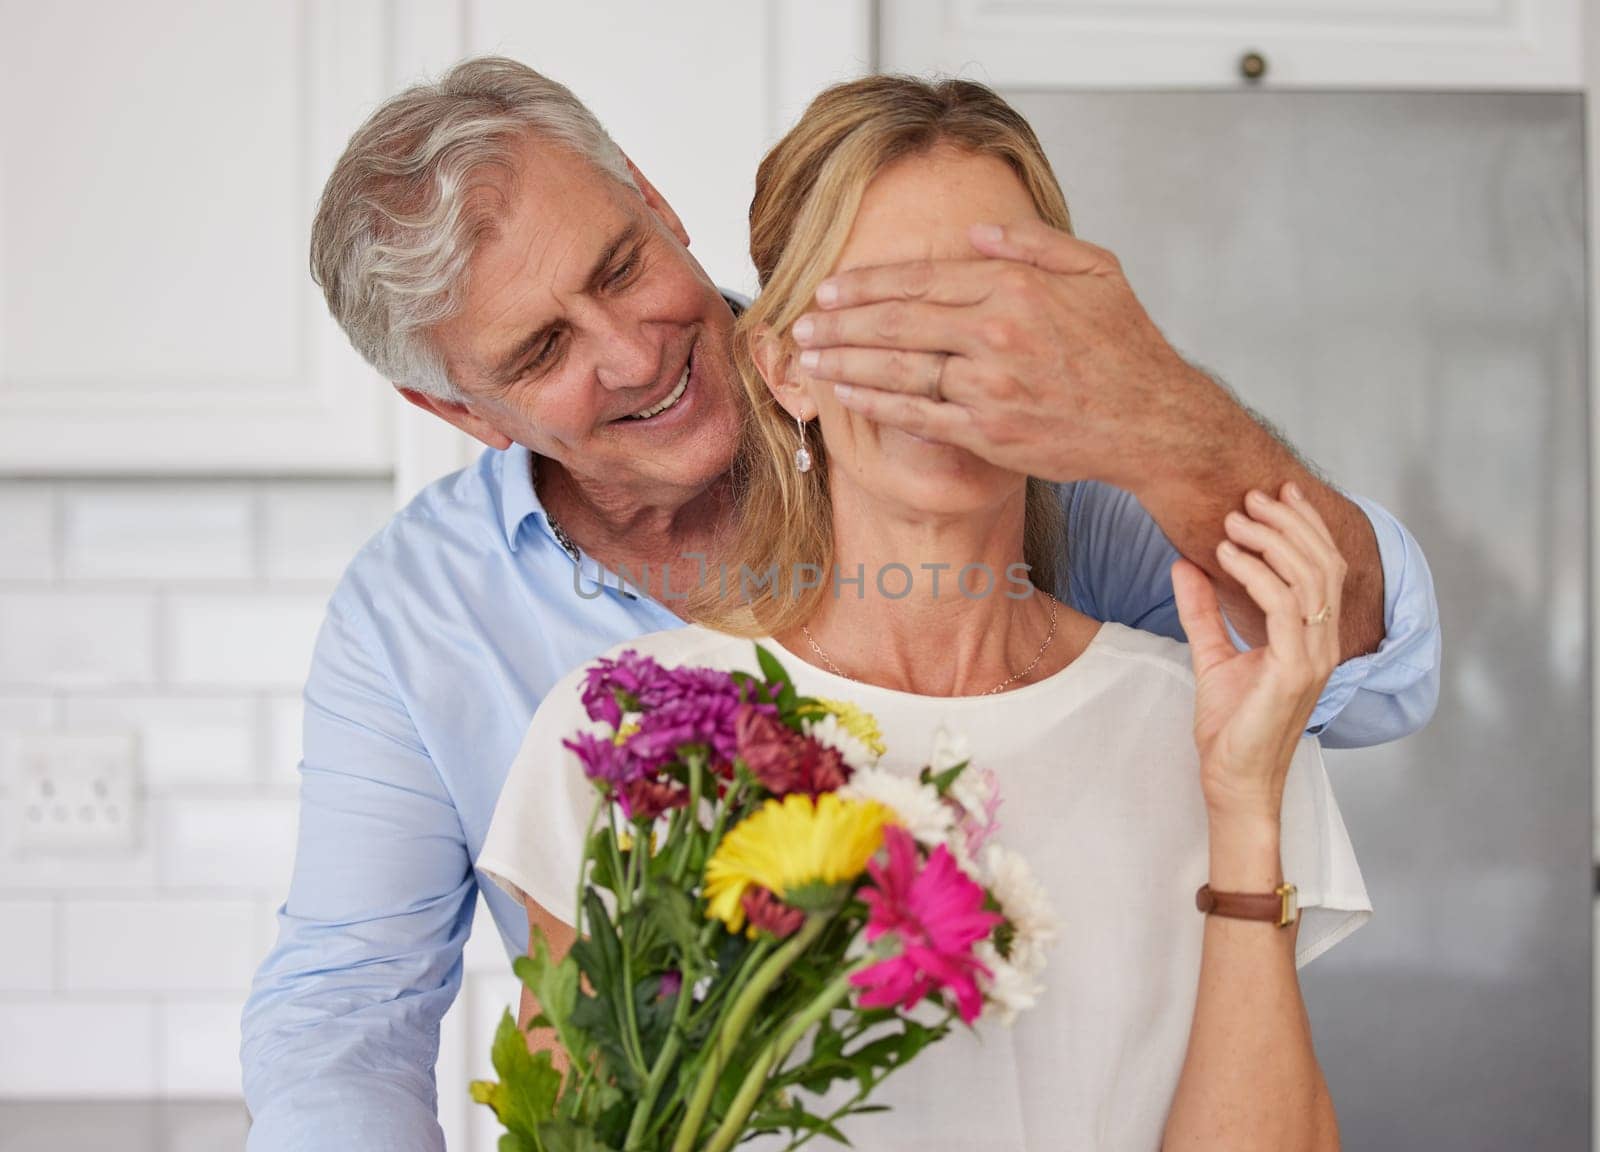 Senior couple covering eyes for flowers surprise, anniversary love and valentines day in New Zealand home. Happy man giving bouquet to woman for birthday gift, present and celebrate romance together.